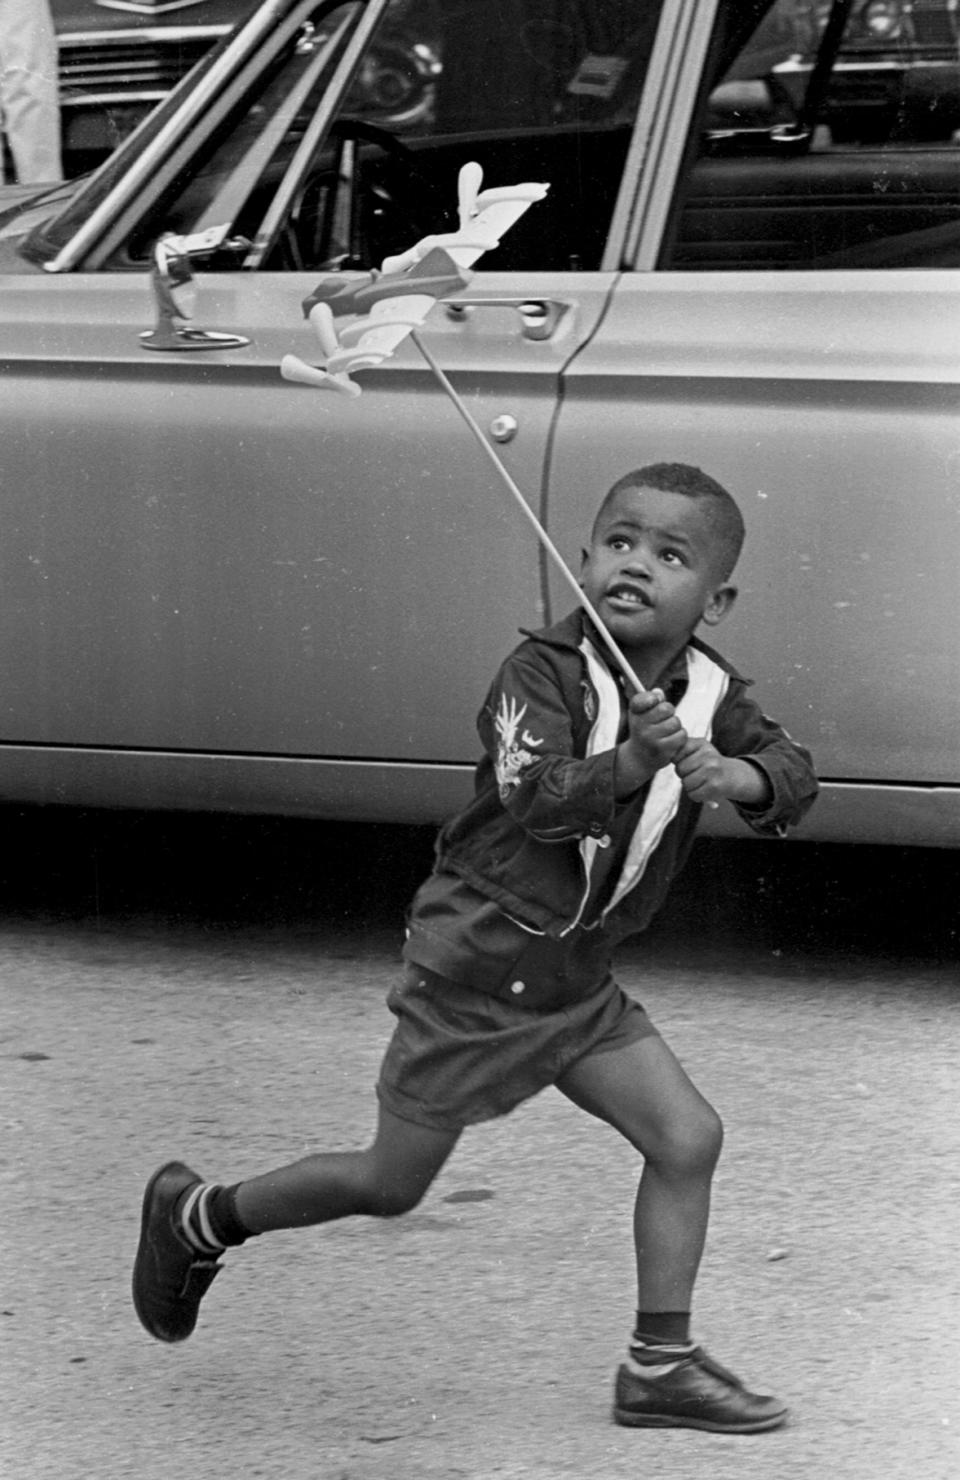 A young boy is intently focused upon his toy airplane, perched on a long stick, as he 'flies' it by running alongside a parked car, Chicago, 1965. (Photo by Robert Abbott Sengstacke/Getty Images)